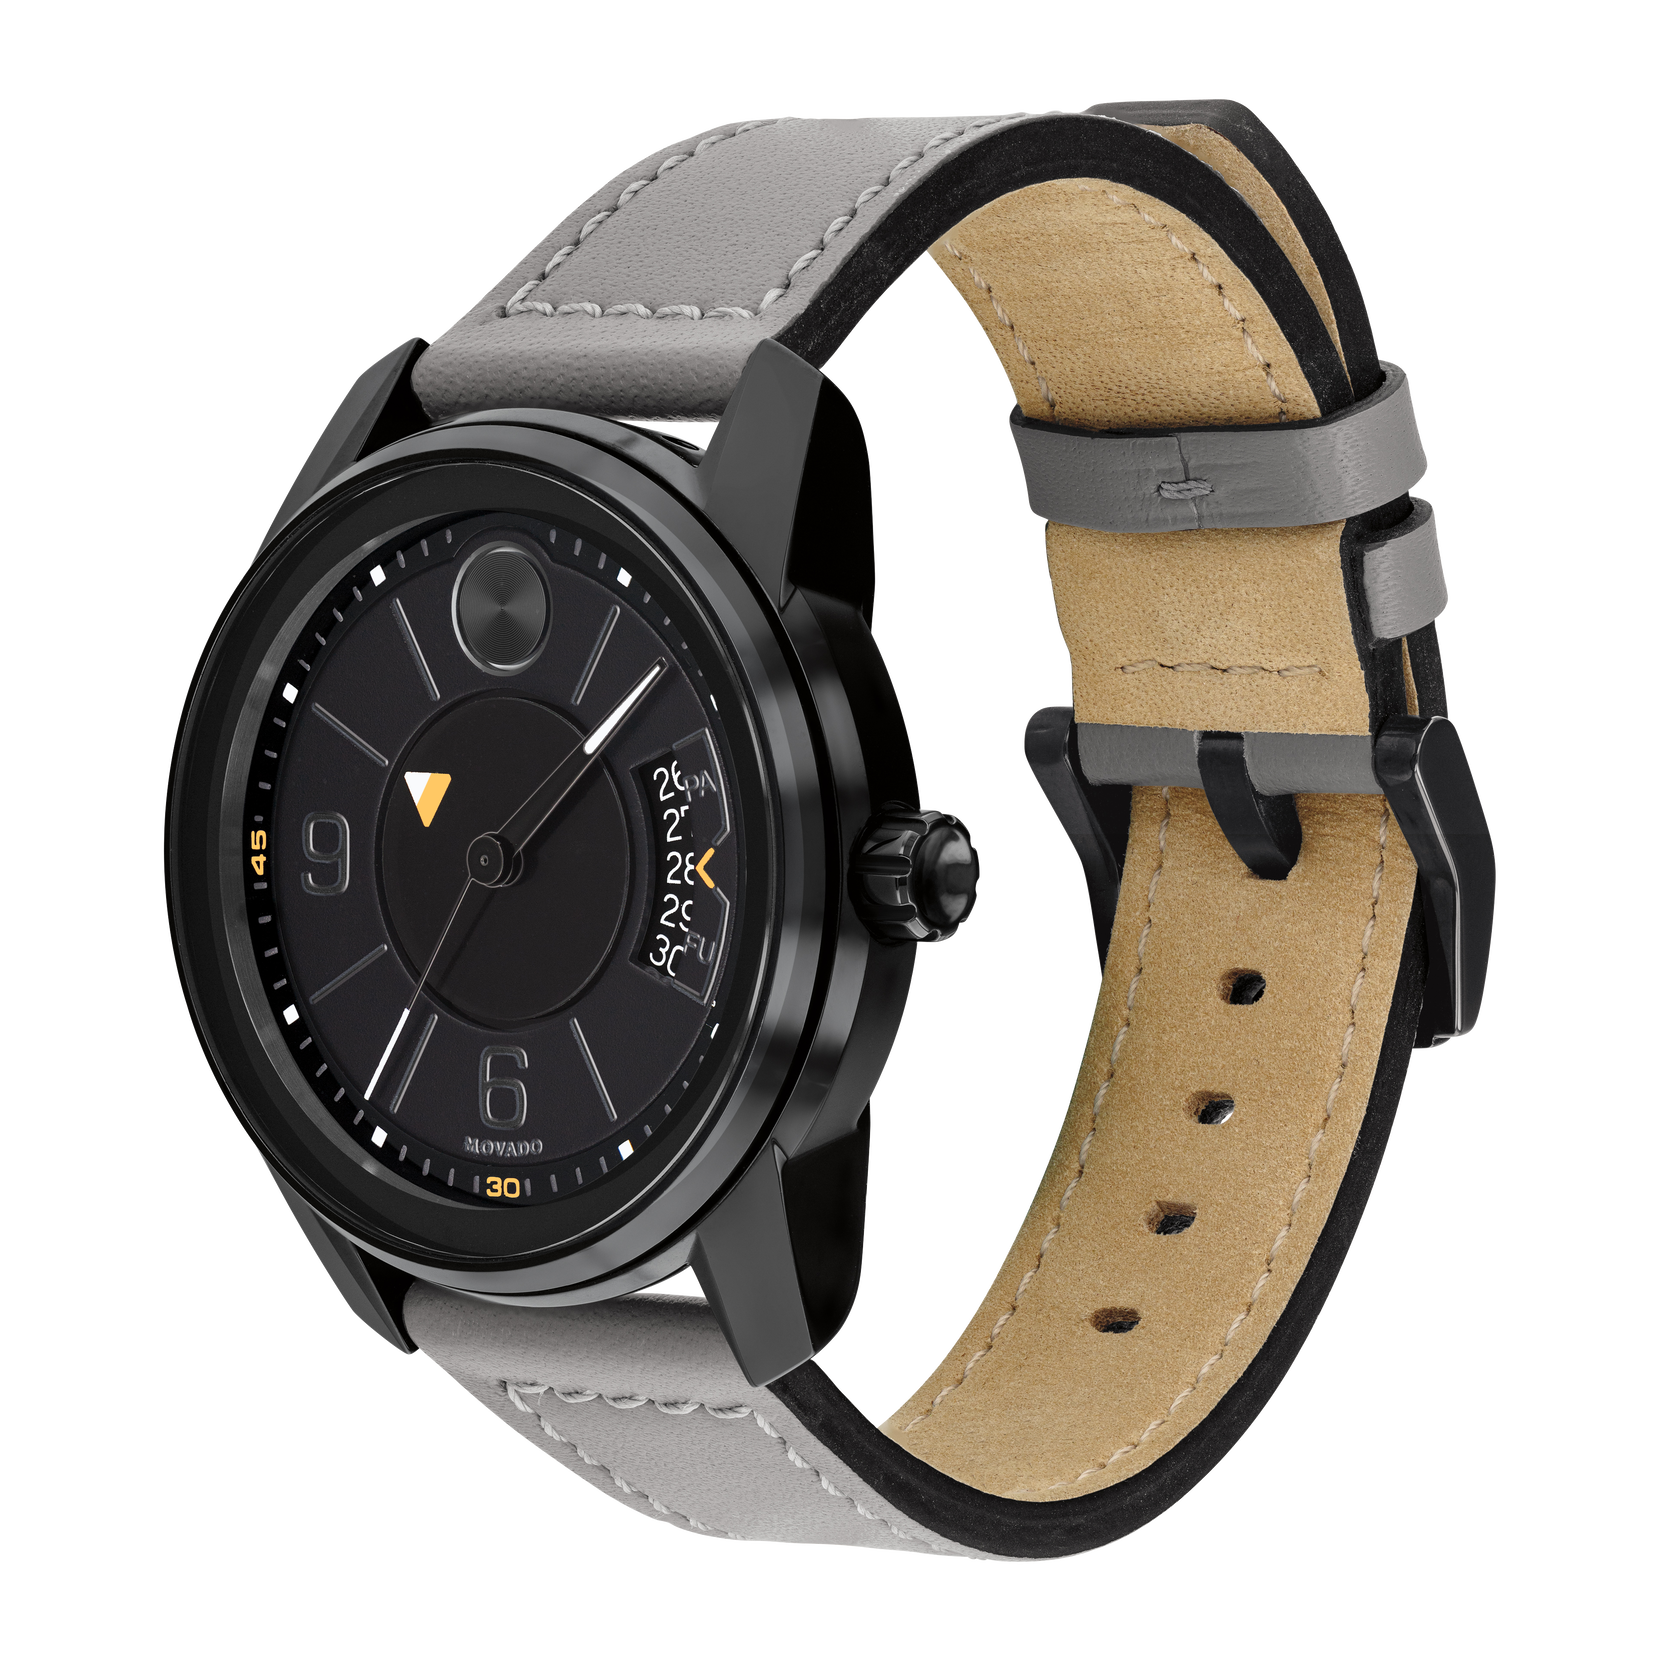 Movado Trend Watch, 42mm